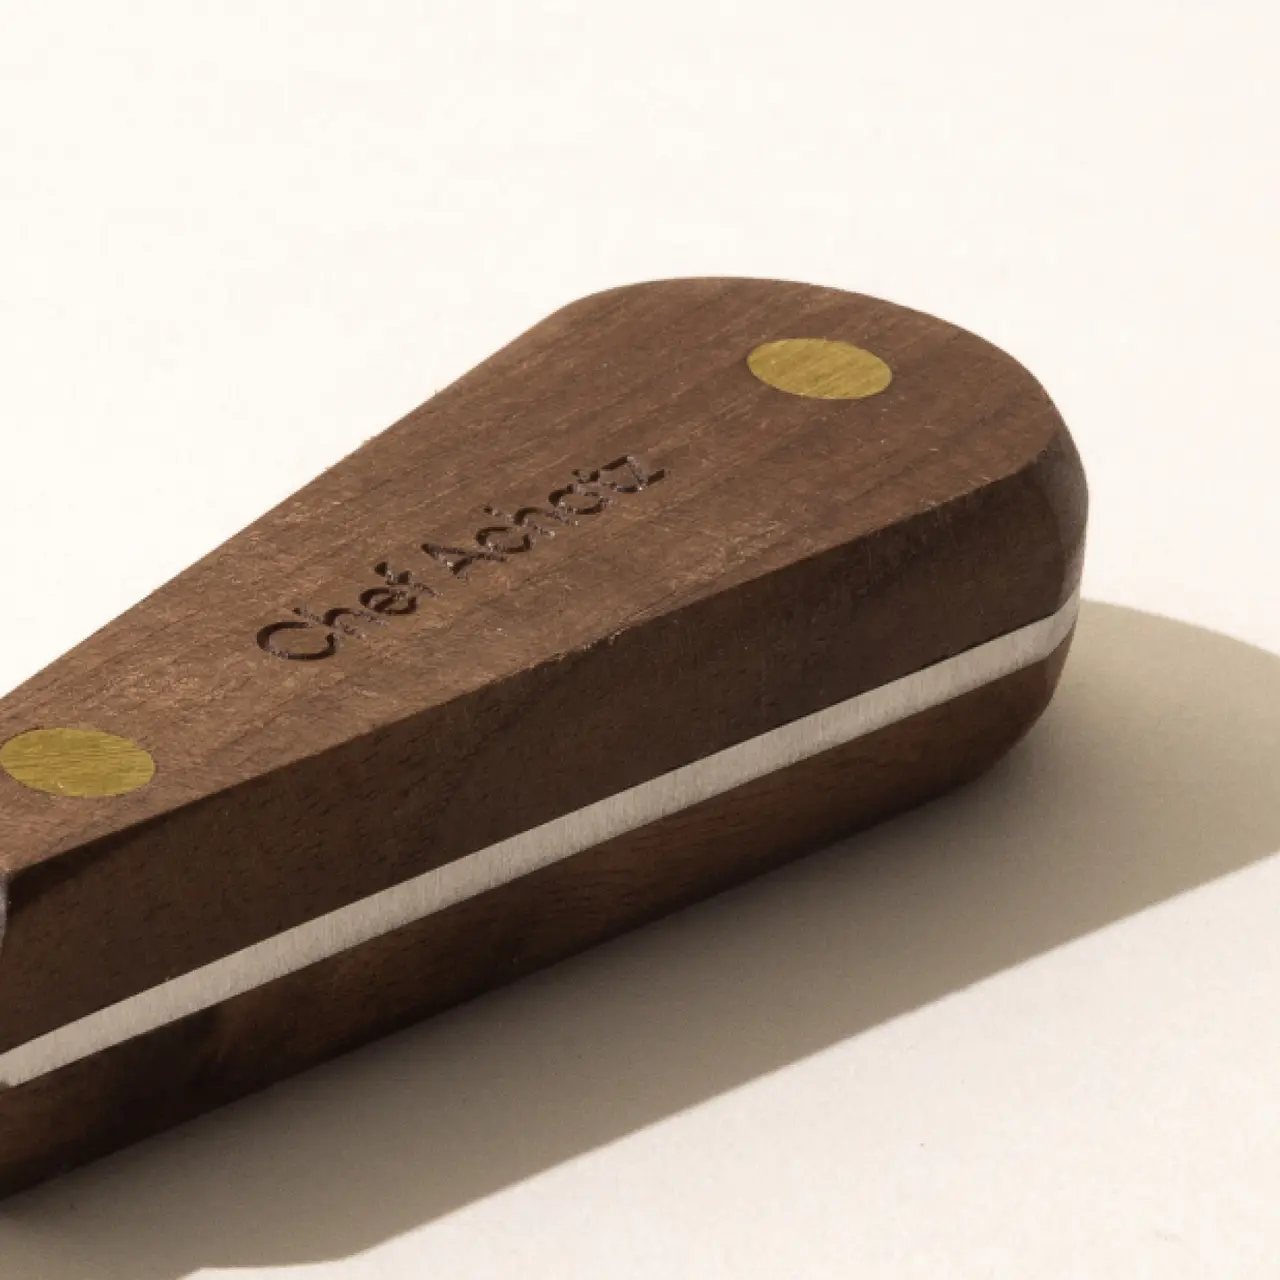 A wooden case with the embossed text "Chef's Pencil" on its surface, featuring light brown with darker brown edges and yellow circular accents.